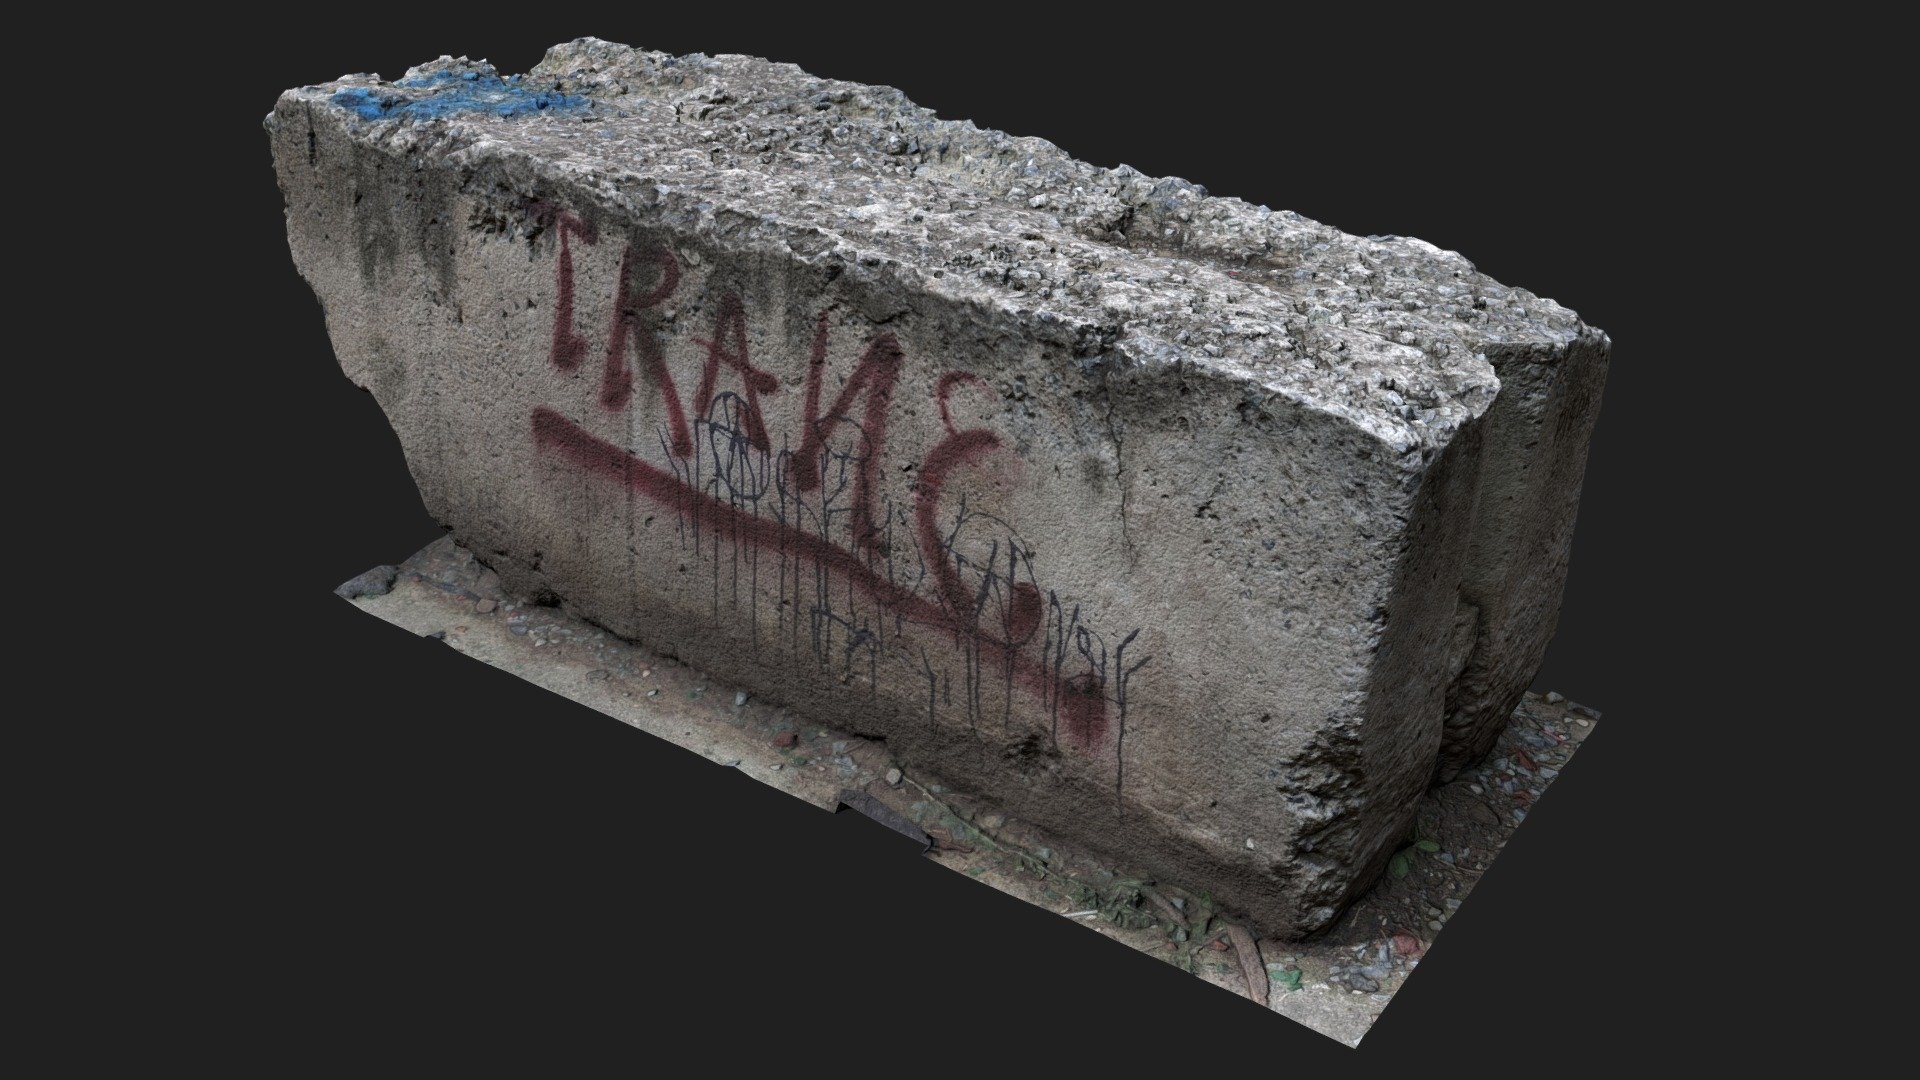 A concrete block that is well suited for creating abandoned areas and buildings or apocalyptic scenes.

Technical specifications:

Close-up scan model 

Optimized model

non-overlapping UV map

ready for animation

PBR textures 4K resolution: Normal, Roughness, Albedo, Ambient Occlusion maps

Download package includes FBX, which are applicable for 3ds Max, Maya, Unreal Engine, Unity, Blender.

Enjoy! - Concrete Block Scan - Buy Royalty Free 3D model by U3DA (@unreal.artists) 3d model